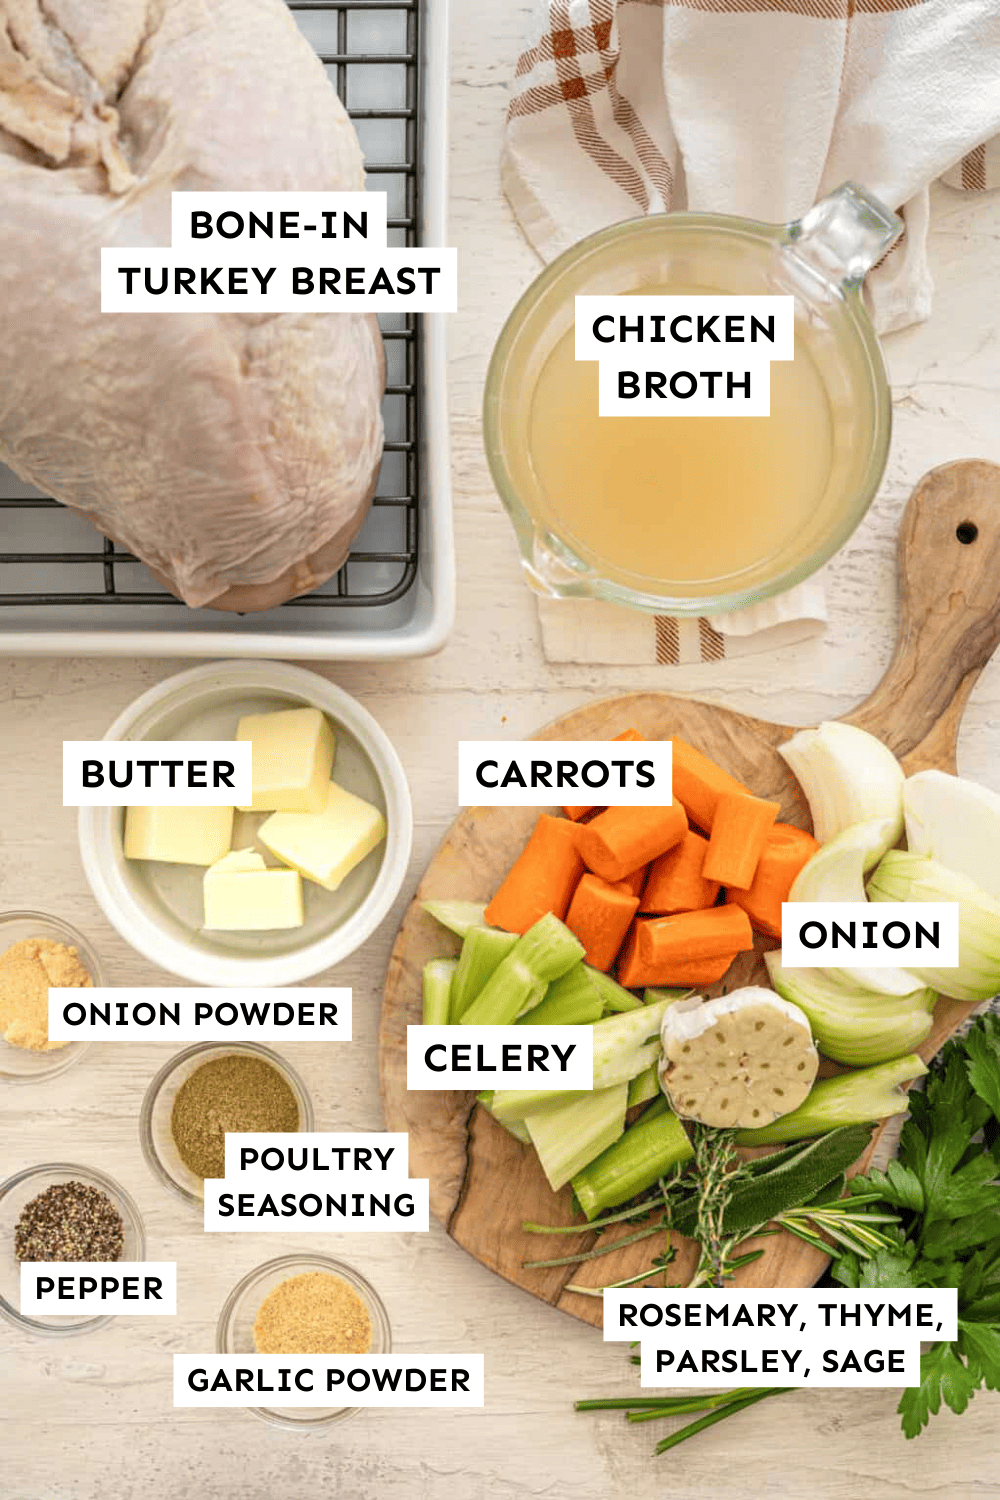 Labeled ingredients for roasting a turkey breast measured out onto a counter with some in bowls, and some on a wooden cutting board.